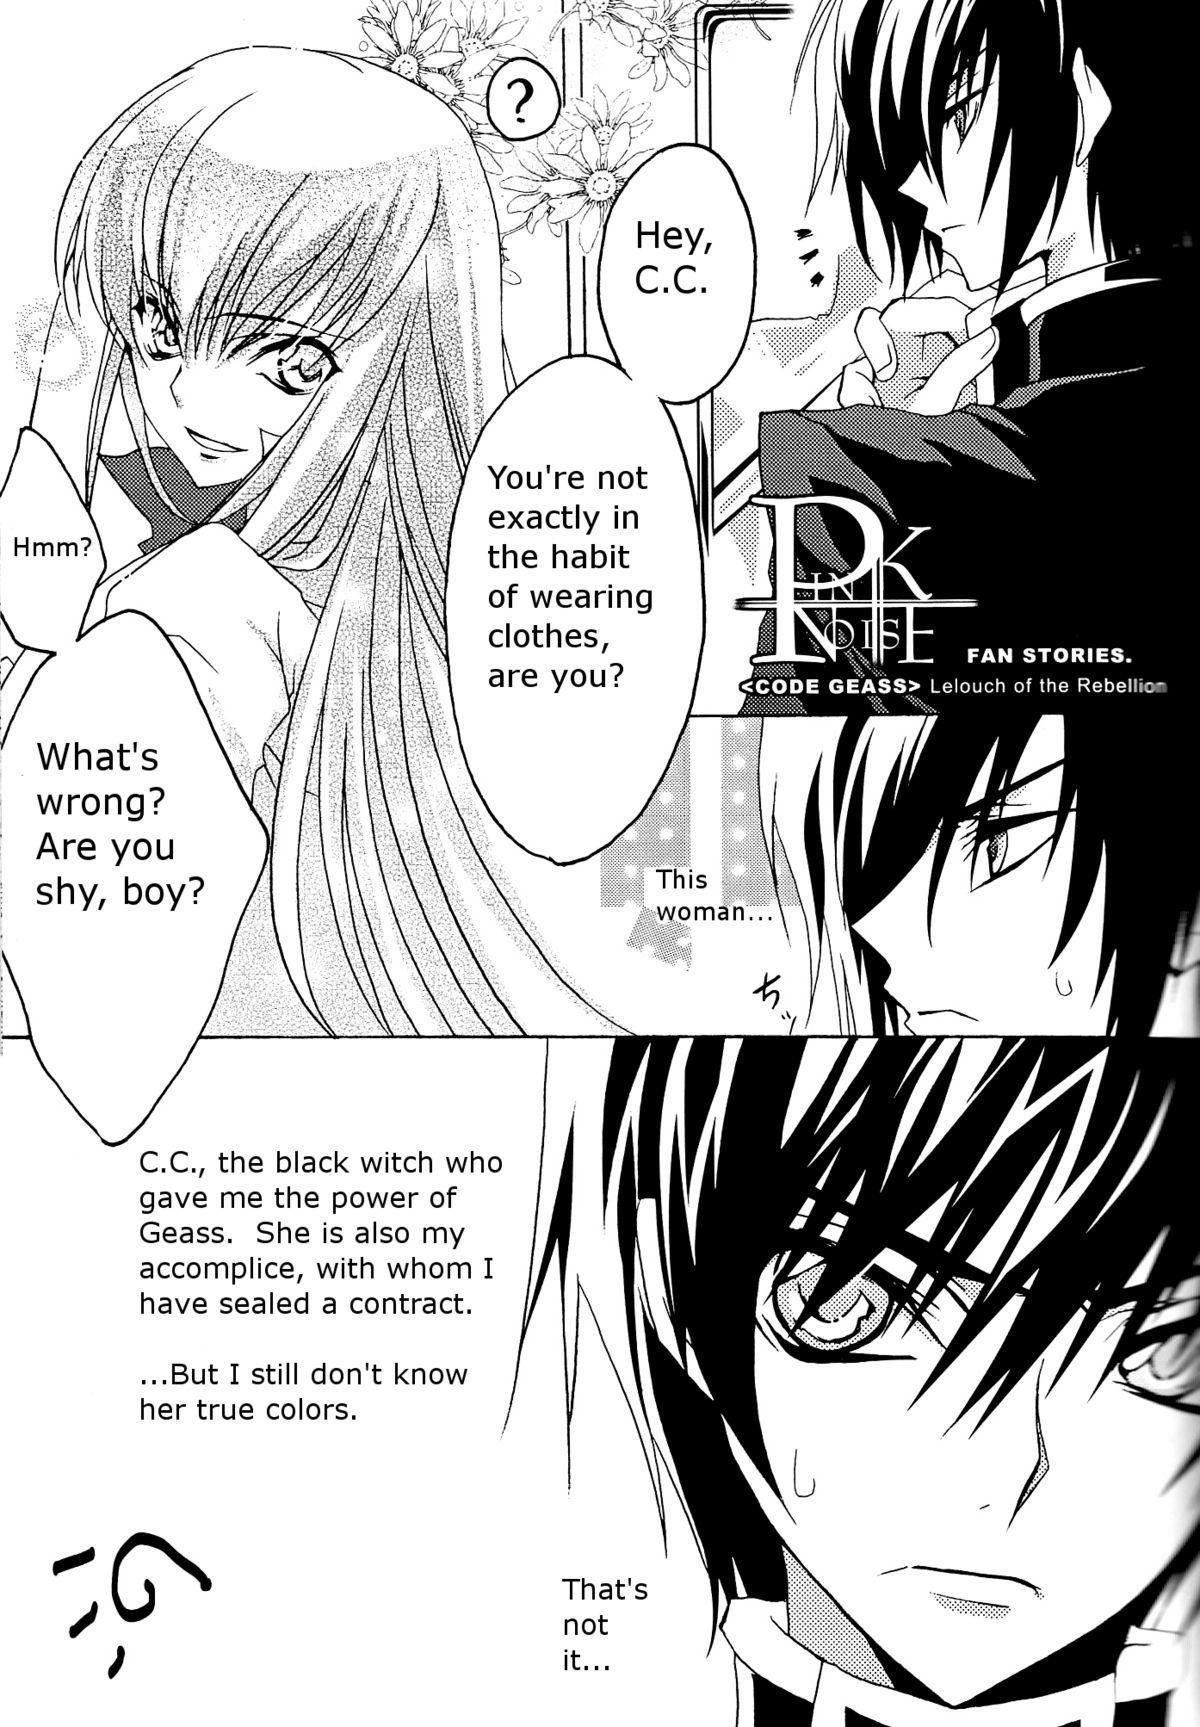 Story Pink Noise - Code geass Innocent - Page 9